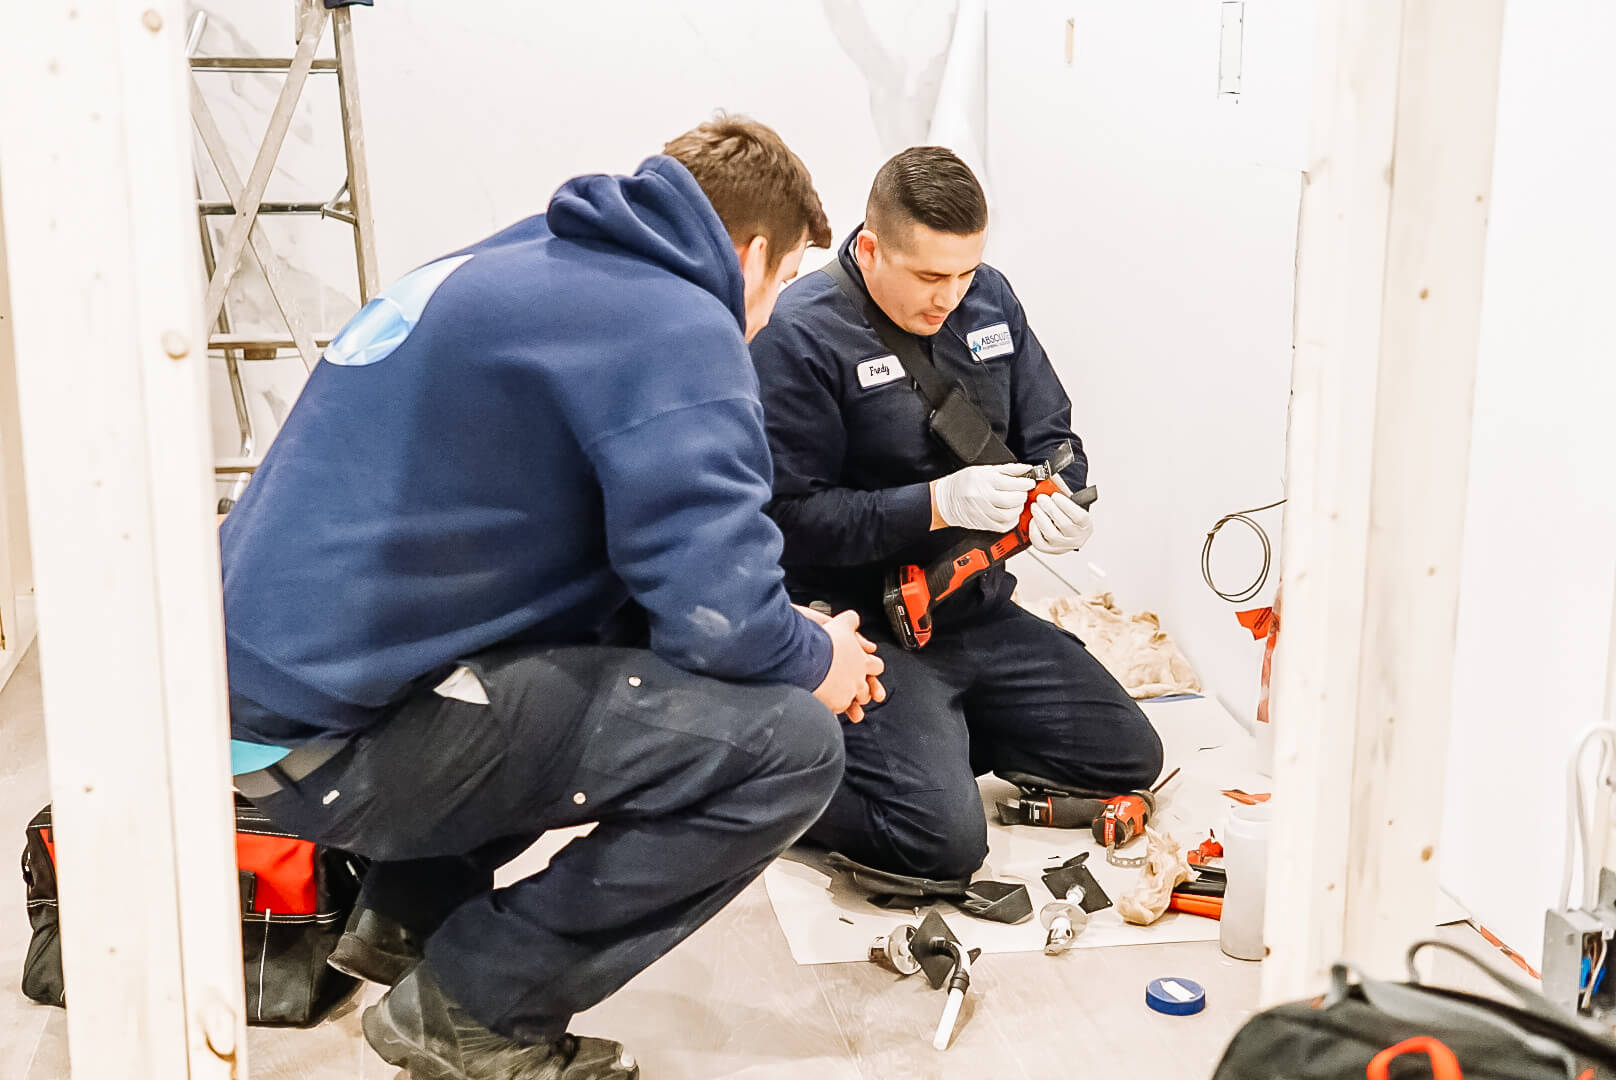 Looking for someone to help with a Boiler repair in Tsawwassen BC? Absolute Plumbing Solutions has scheduling options that fit your availability